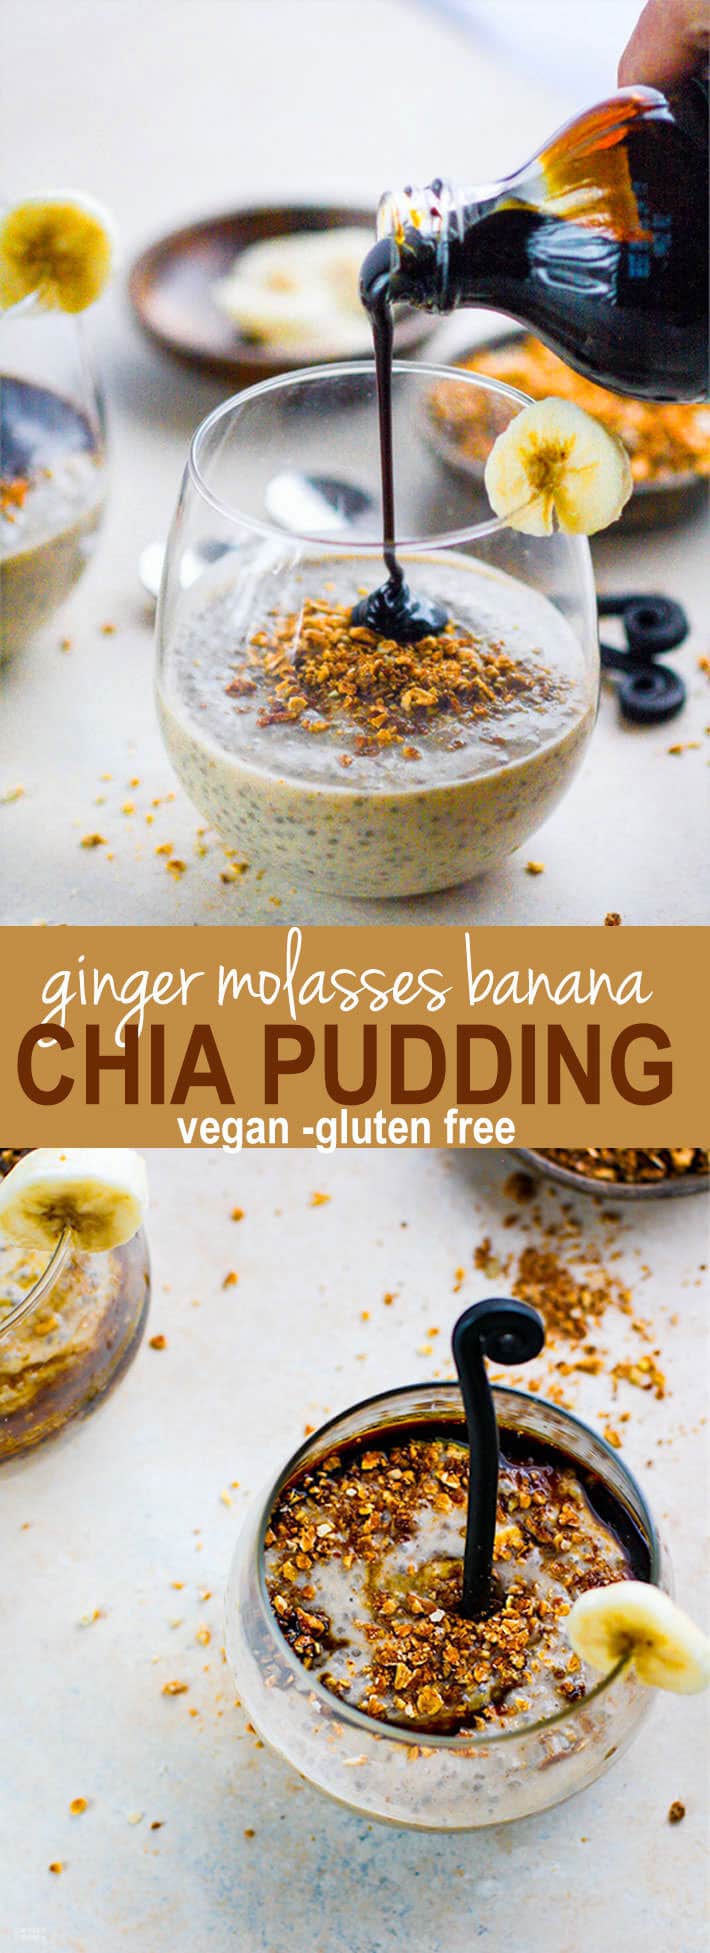 Vegan Ginger Molasses Banana Chia Pudding! This gluten free chia pudding recipe is definitely one to keep around! Taste like a dessert! Simple to make! But more importantly, the key ingredients (ginger, molasses, banana, chia) work together in harmony to create one IMMUNITY boosting recipe! Which is needed for the holiday season or any time of year. www.cottercrunch.com